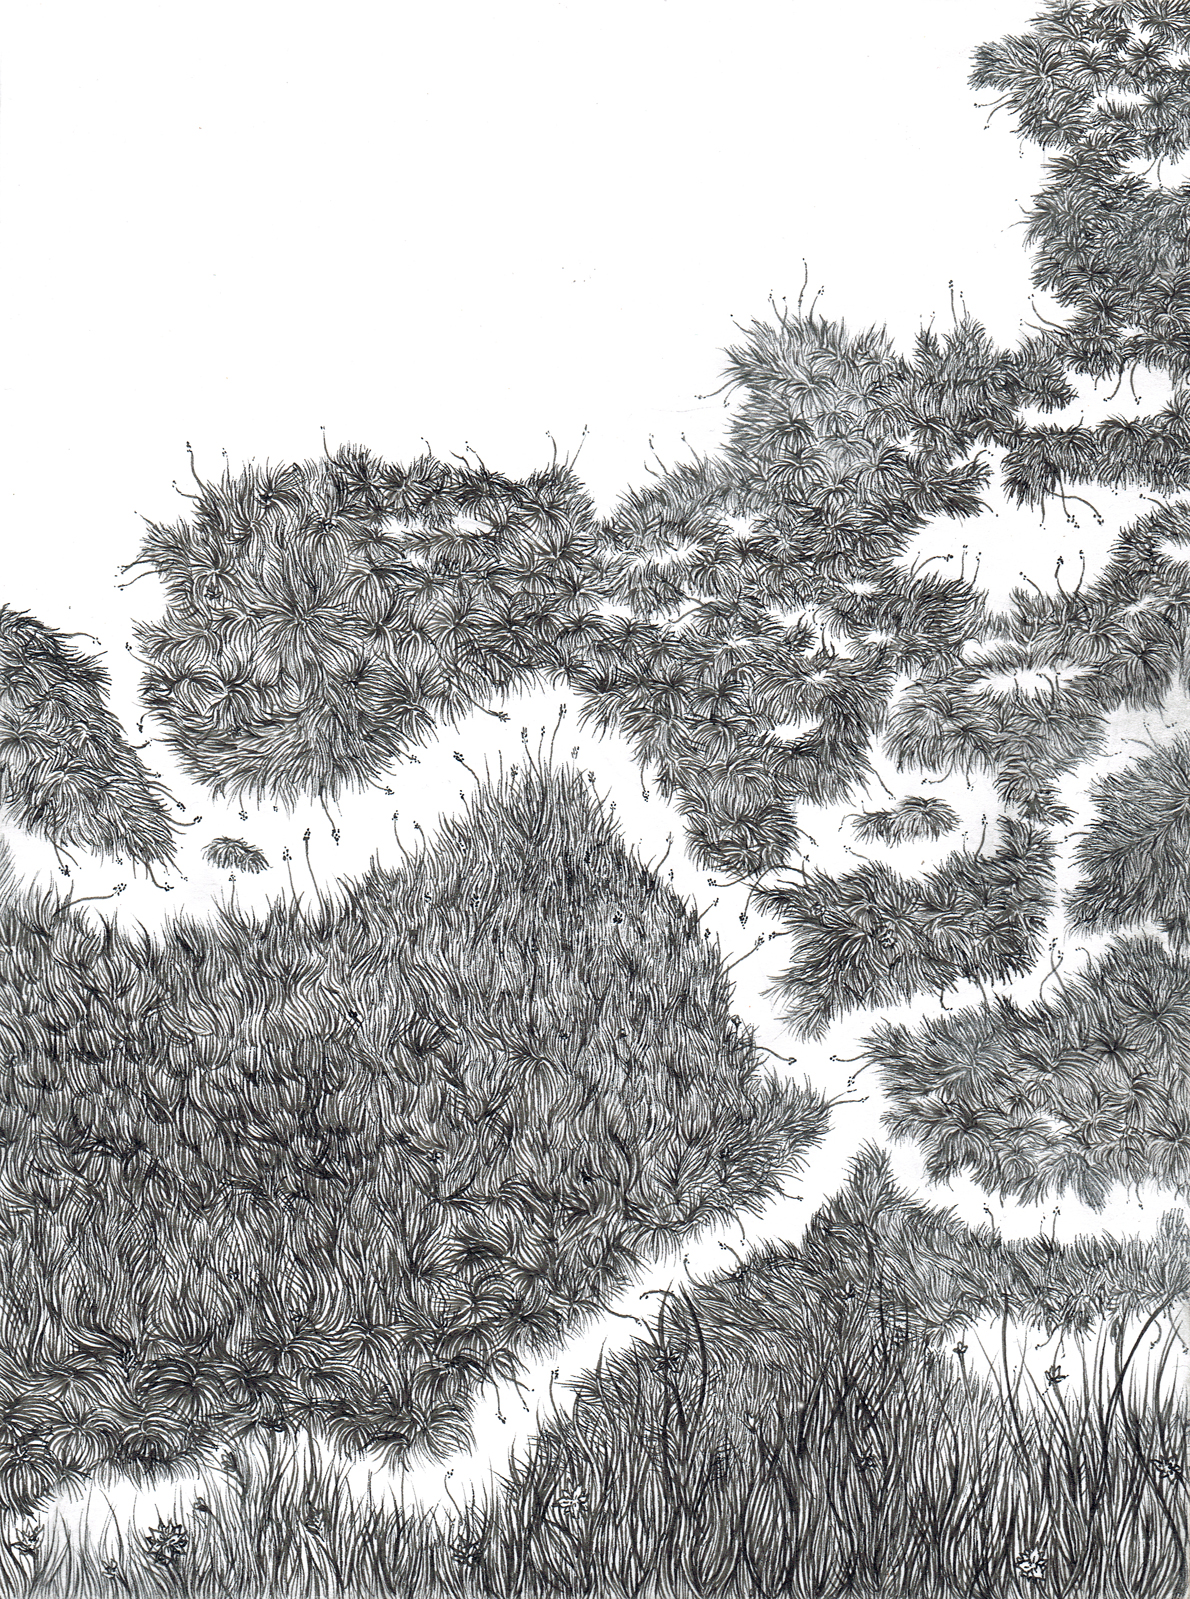 drawing of grass islands fading off into water